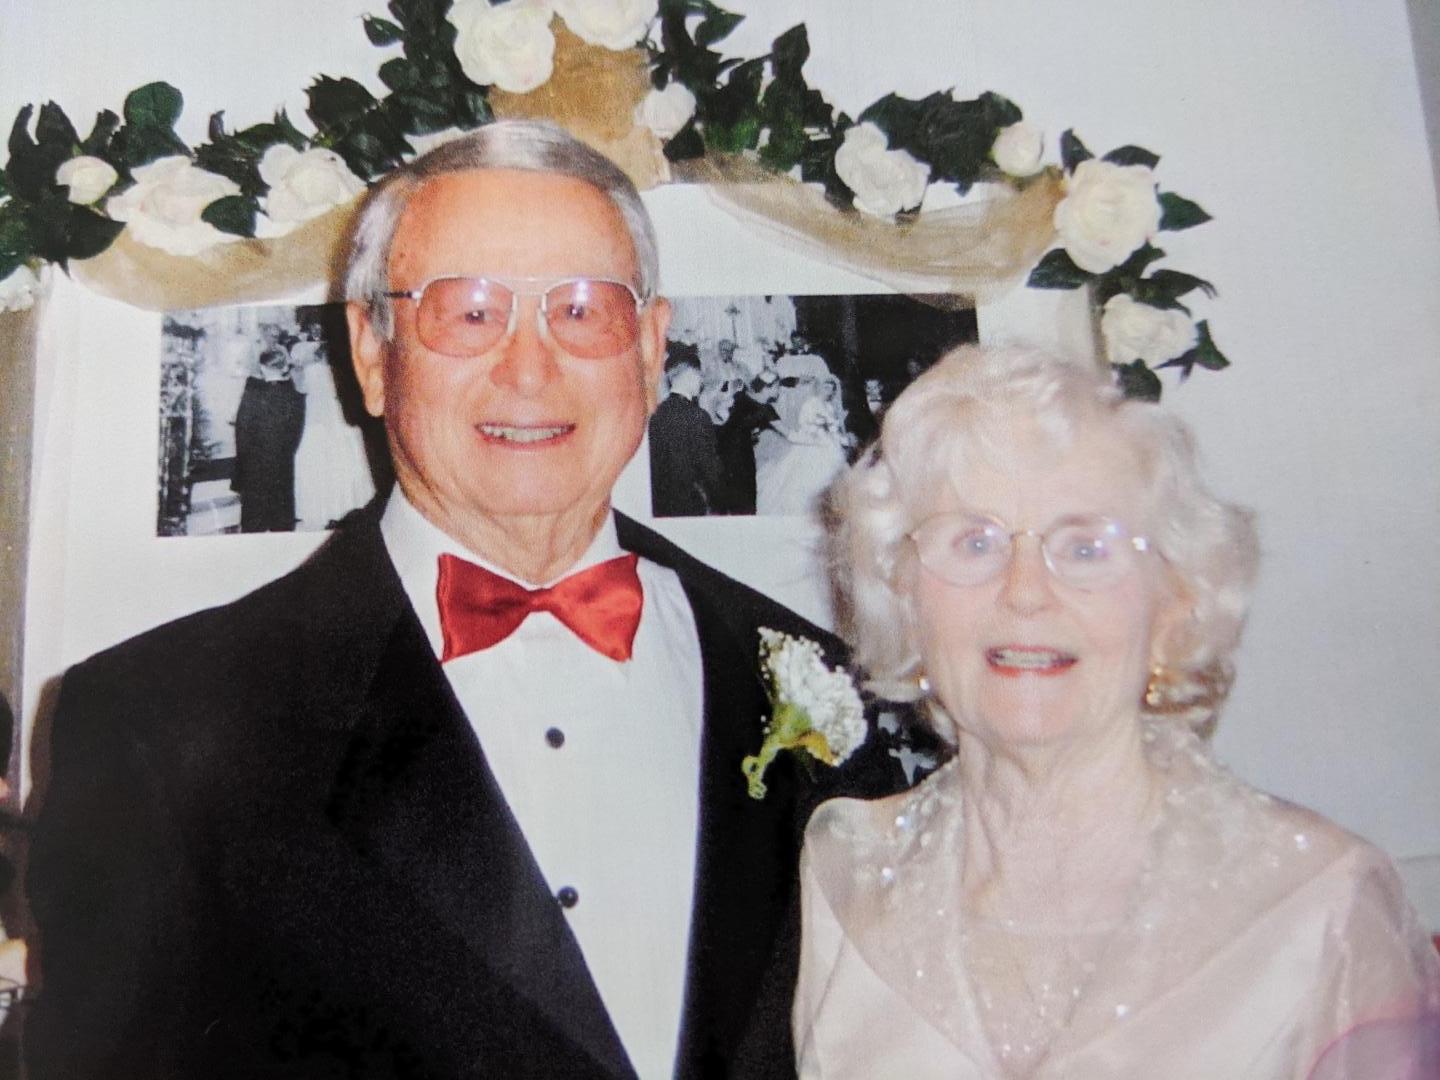 Gene and Ann Spears, pictured at their 50th wedding anniversary, were married for 65 years.